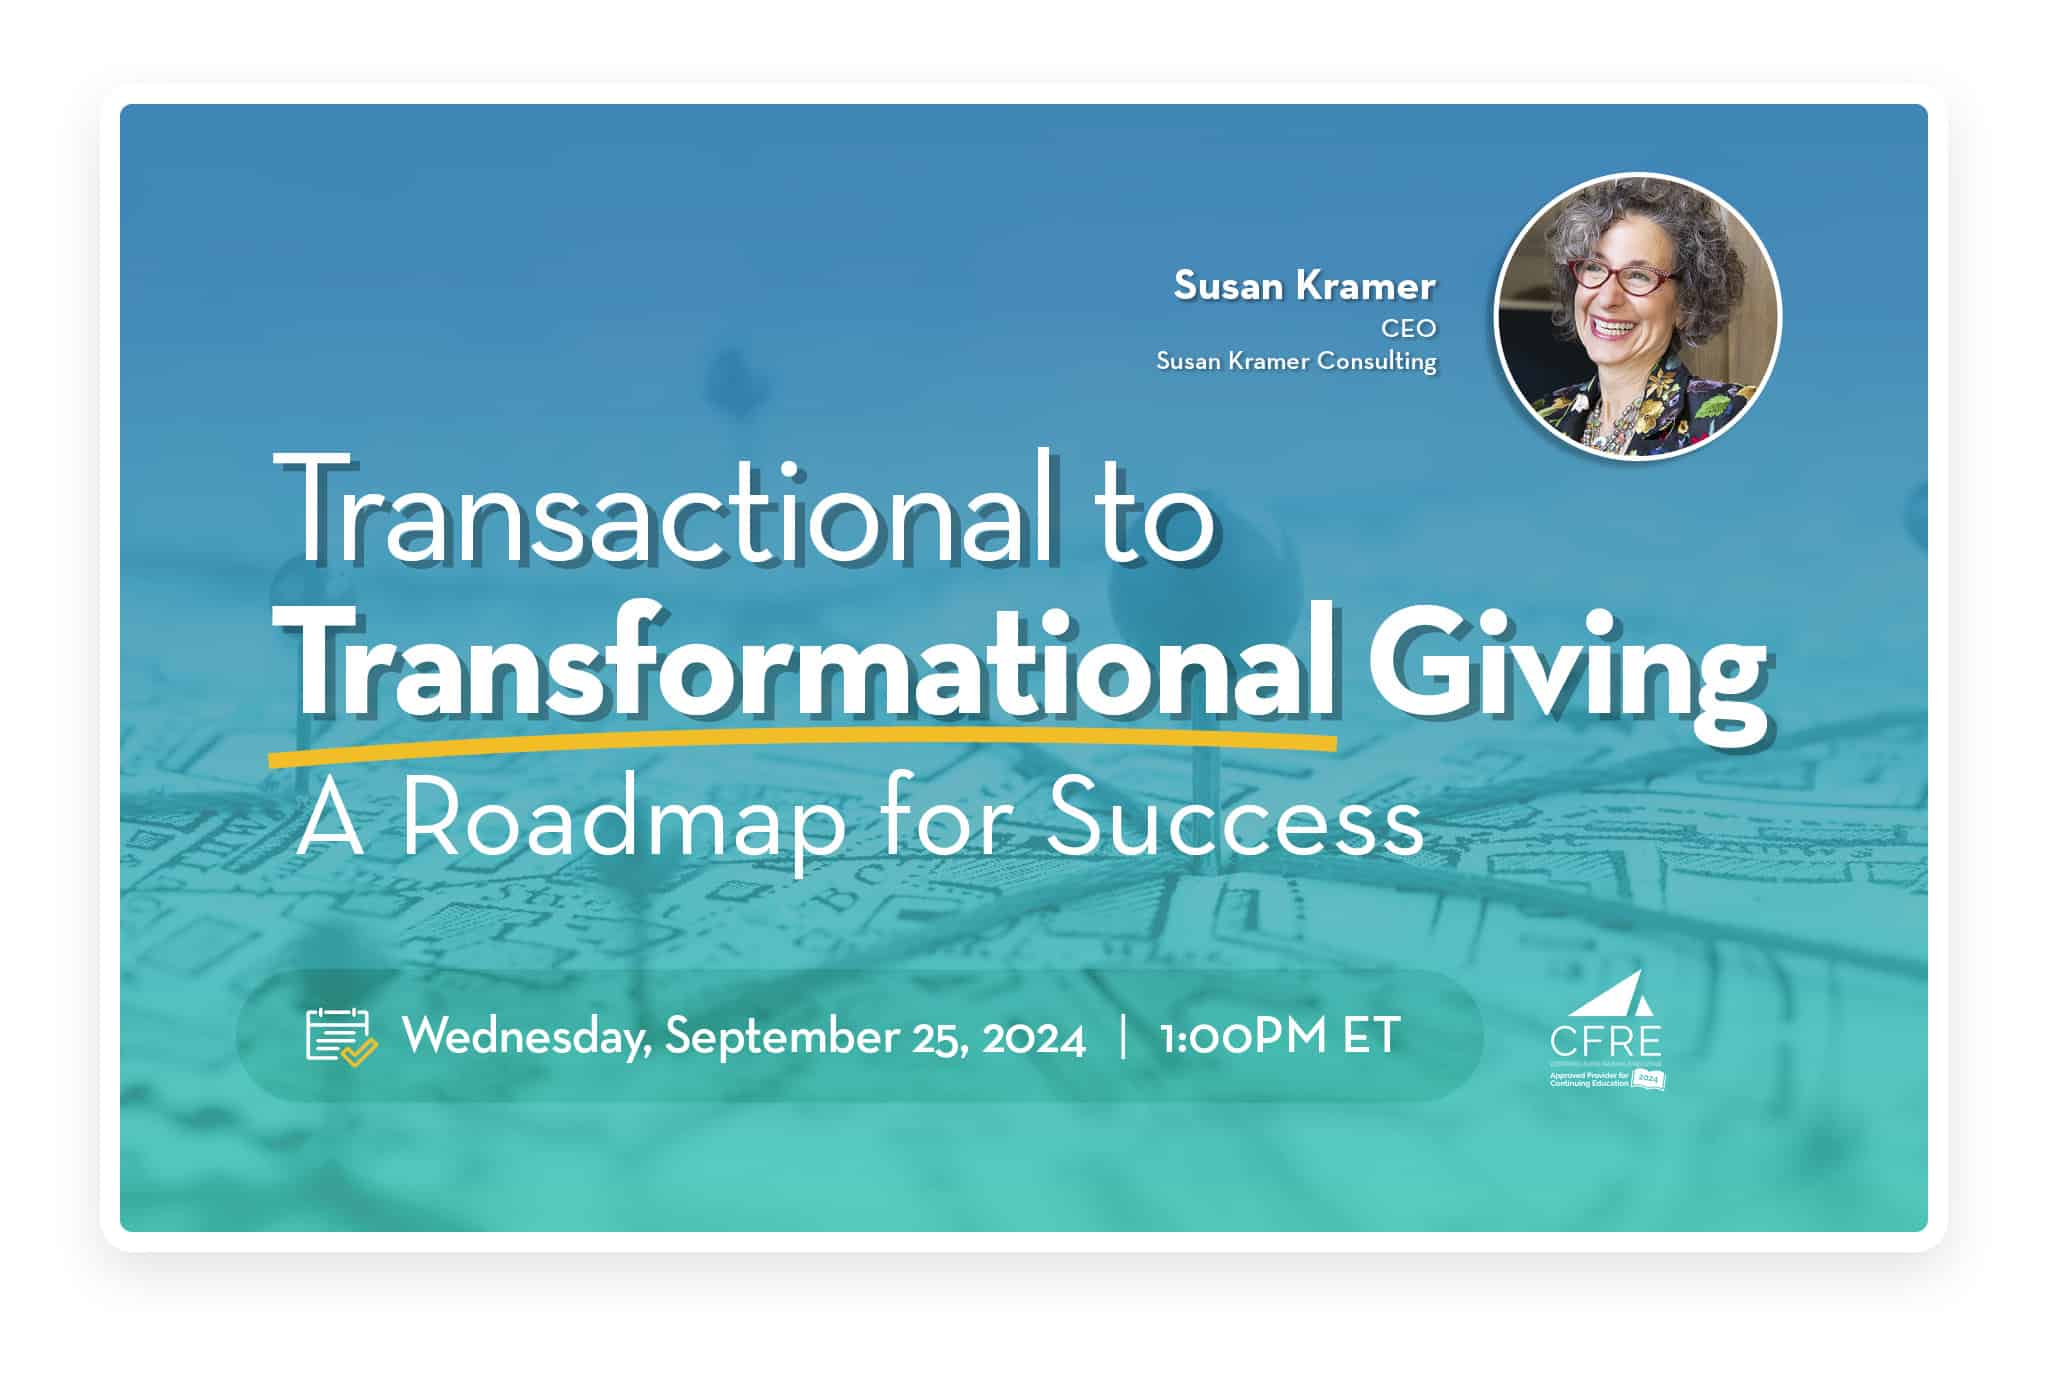 WEBINAR Transactional to Transformational Giving: A Roadmap for Success